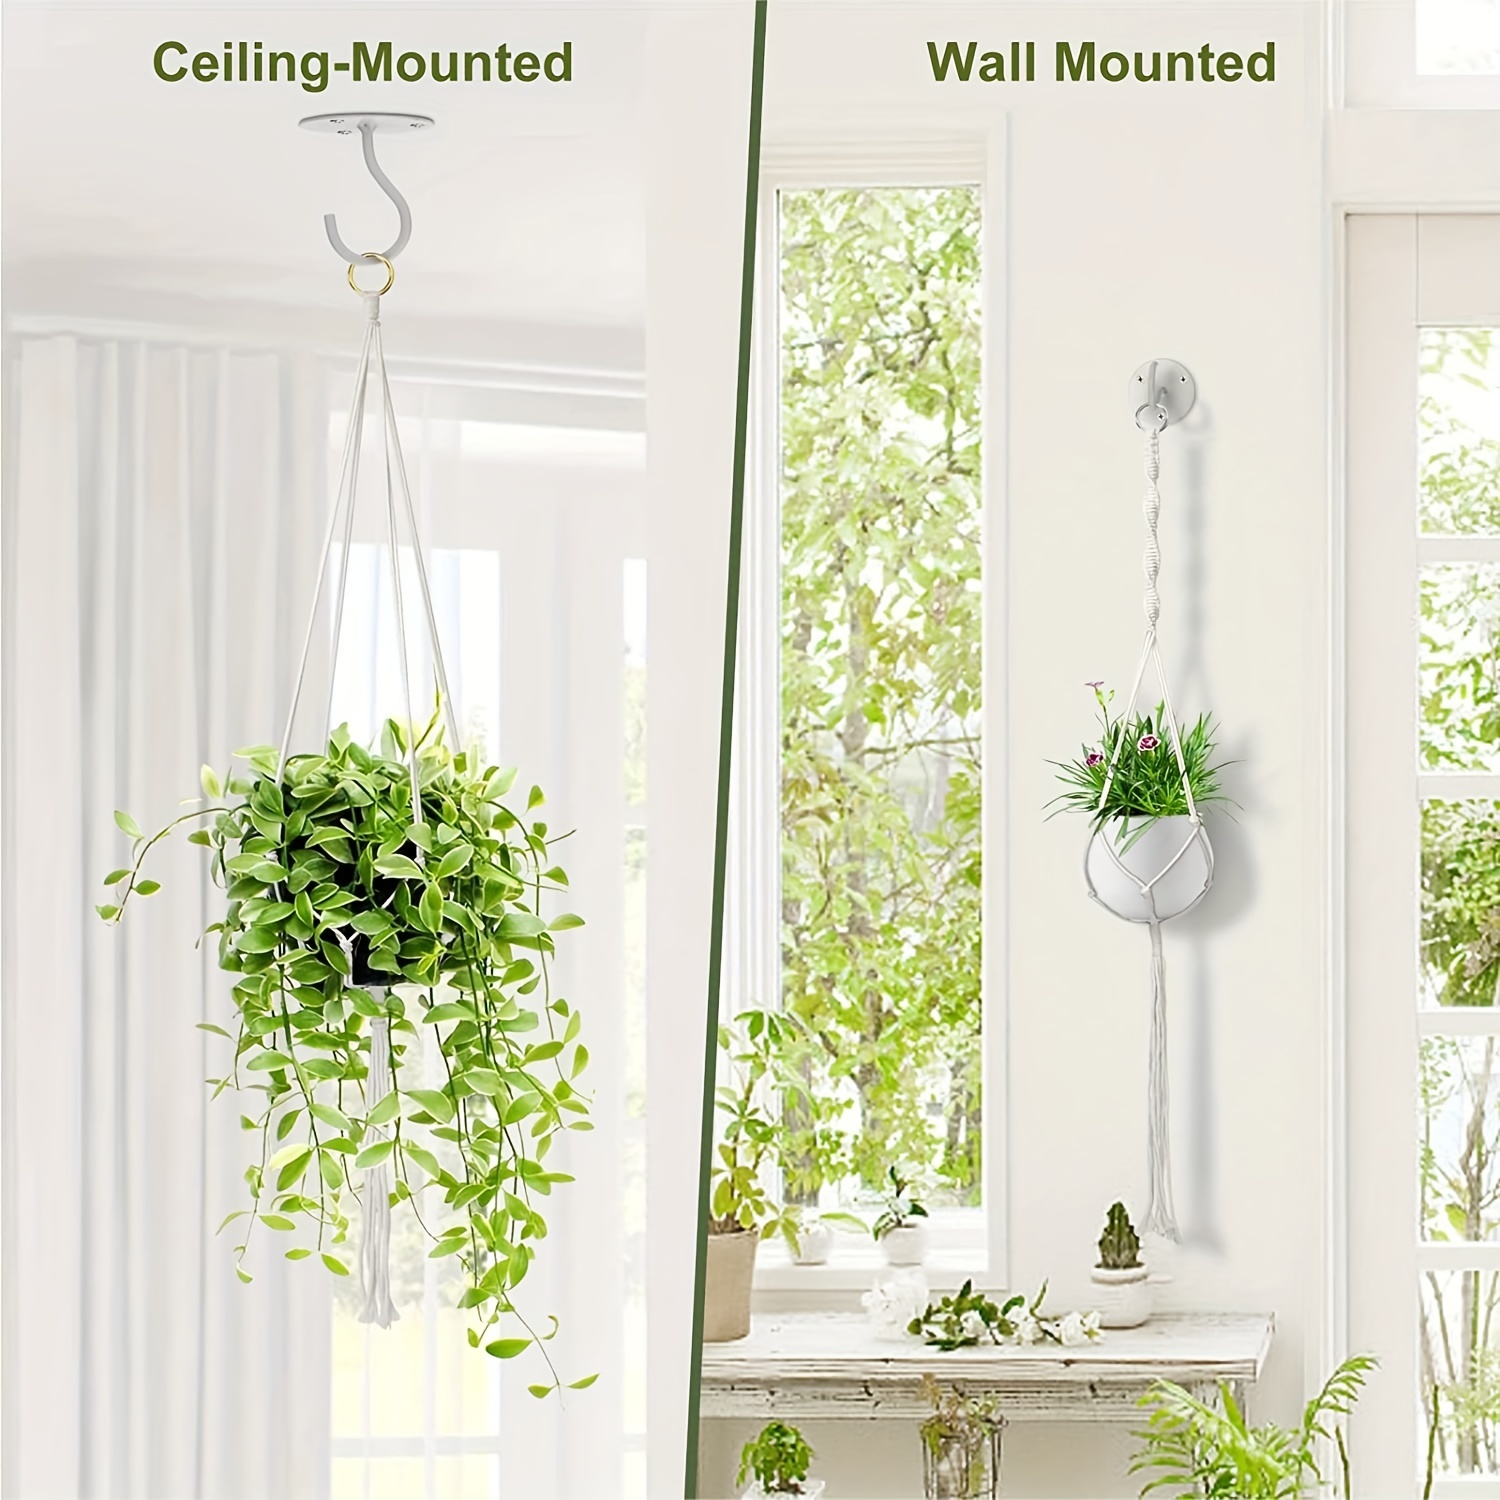 Ceiling Hooks for Hanging Plants, 4 Packs Retro White Wall Mounted Metal Hangers with Anchors for Hanging Planters, Bird Feeders, Lanterns, Wind